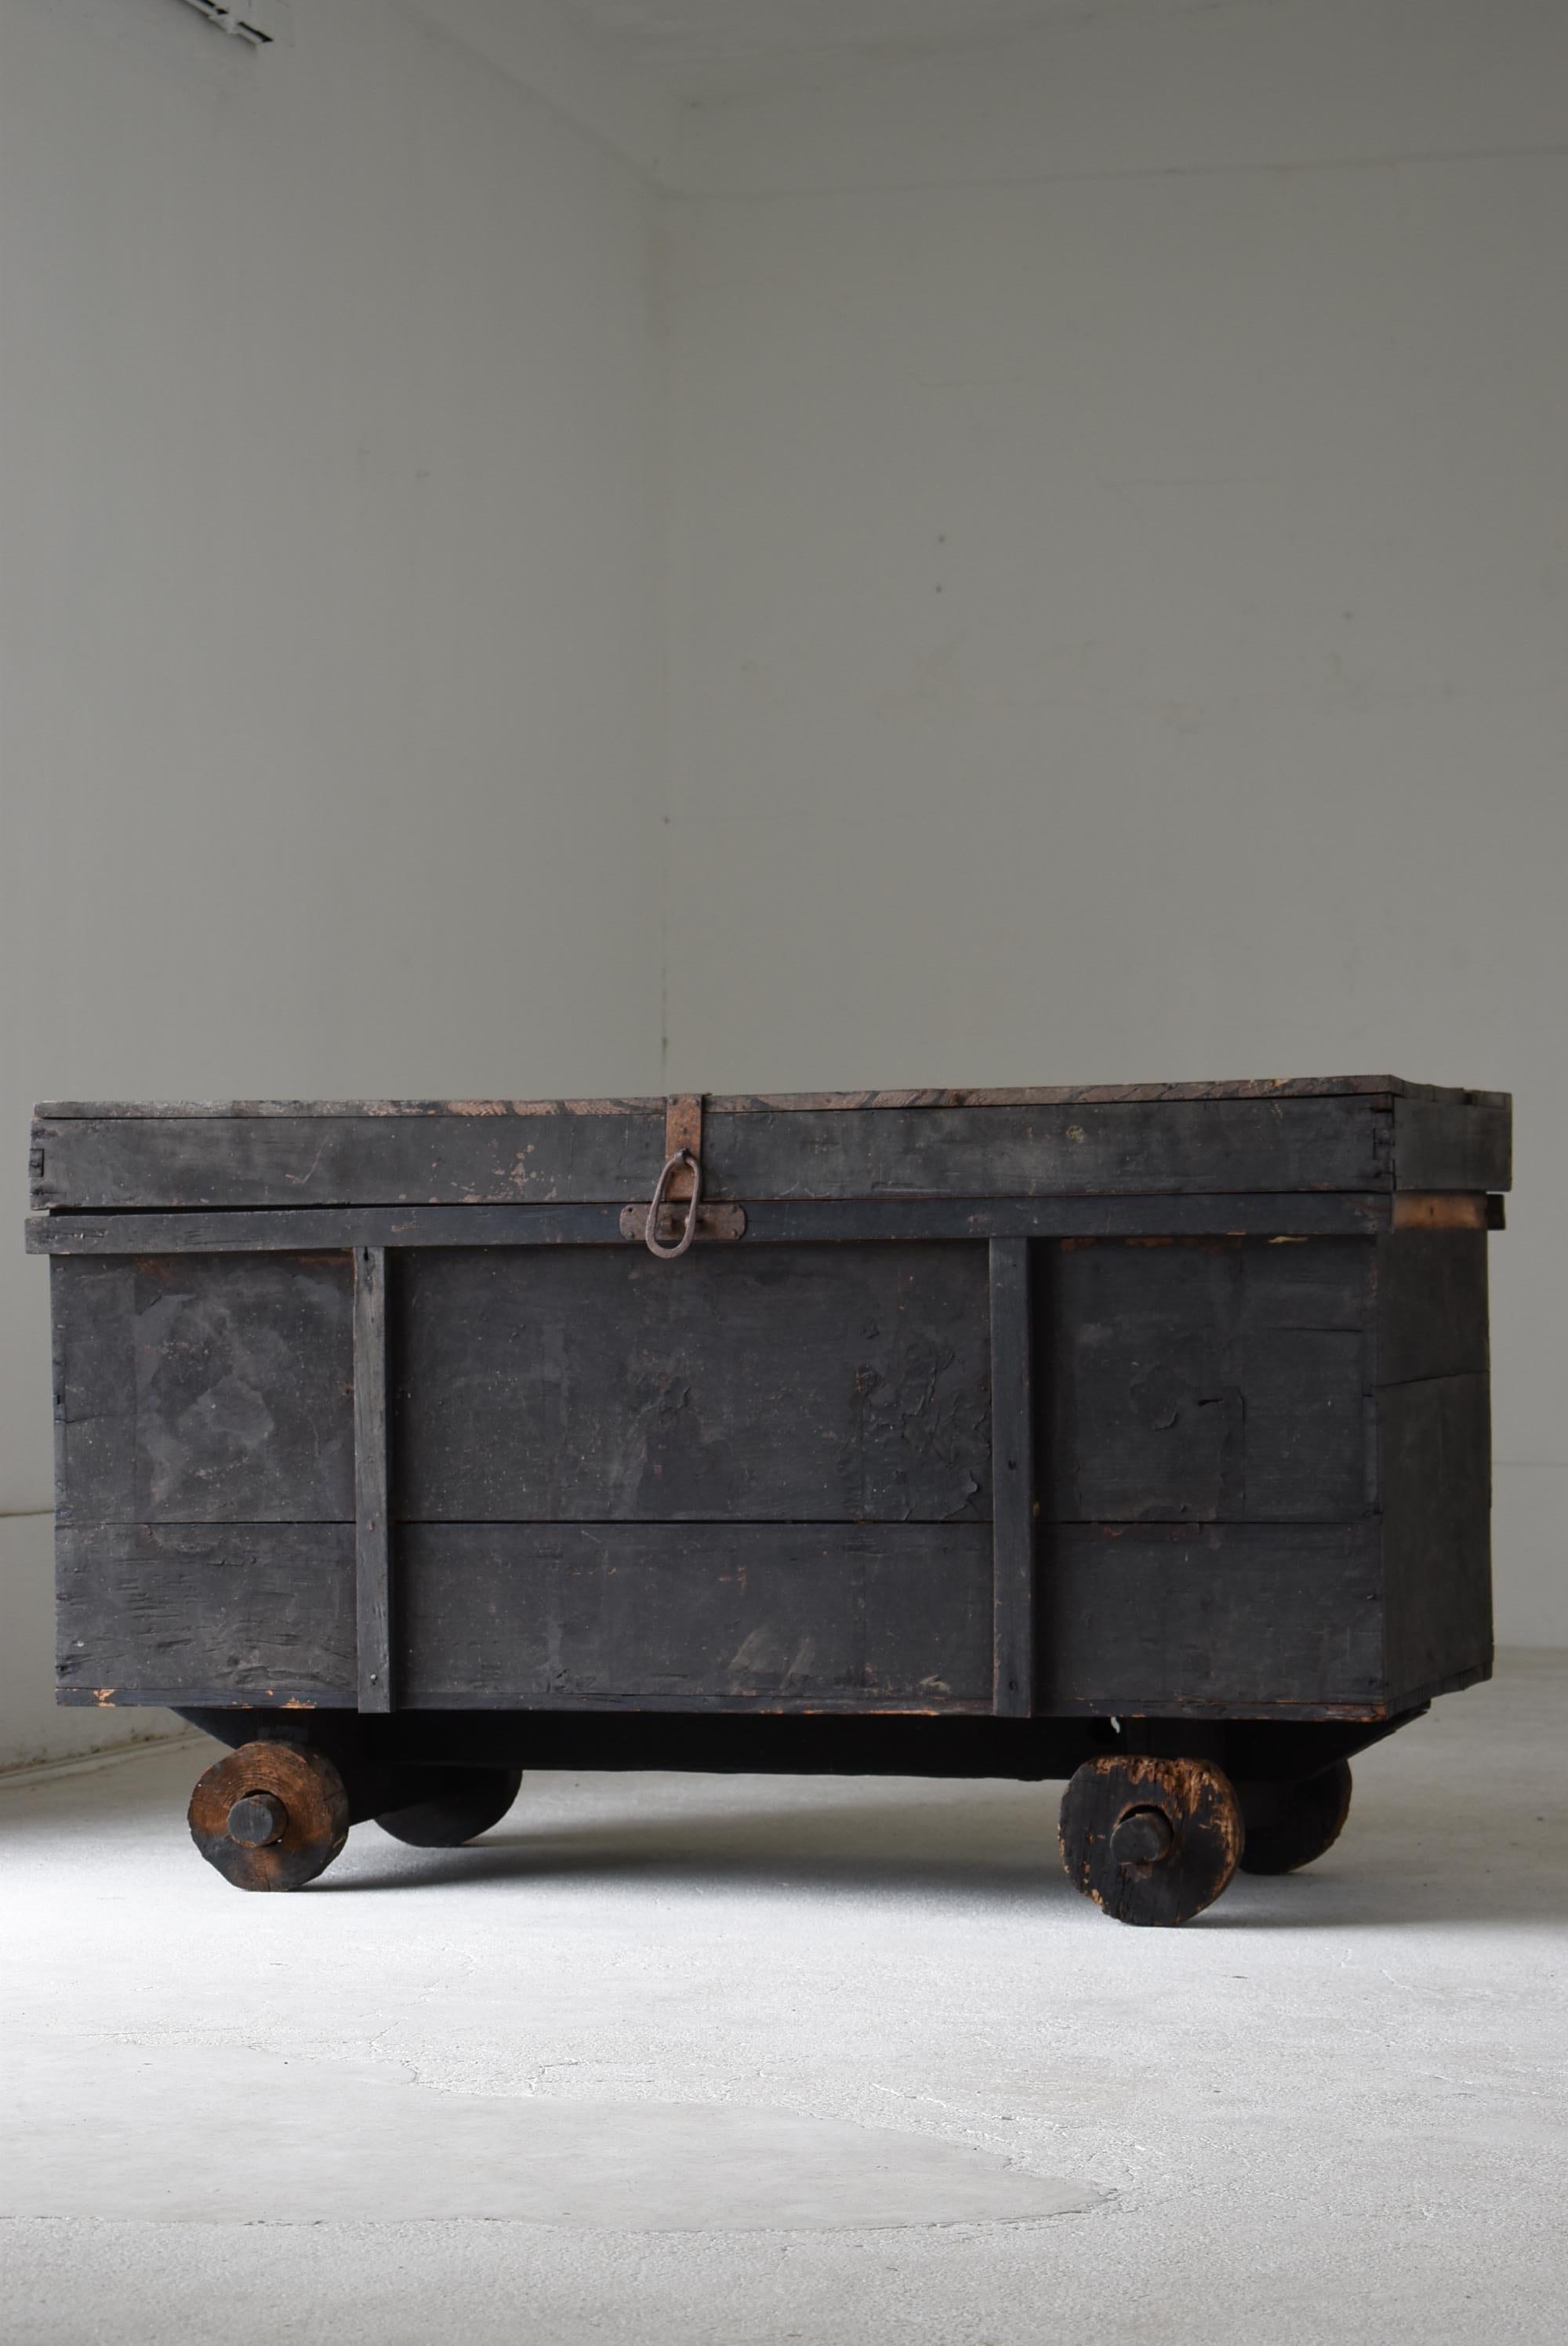 It is a Japanese chest with old wheels.
In Japan, this is called 